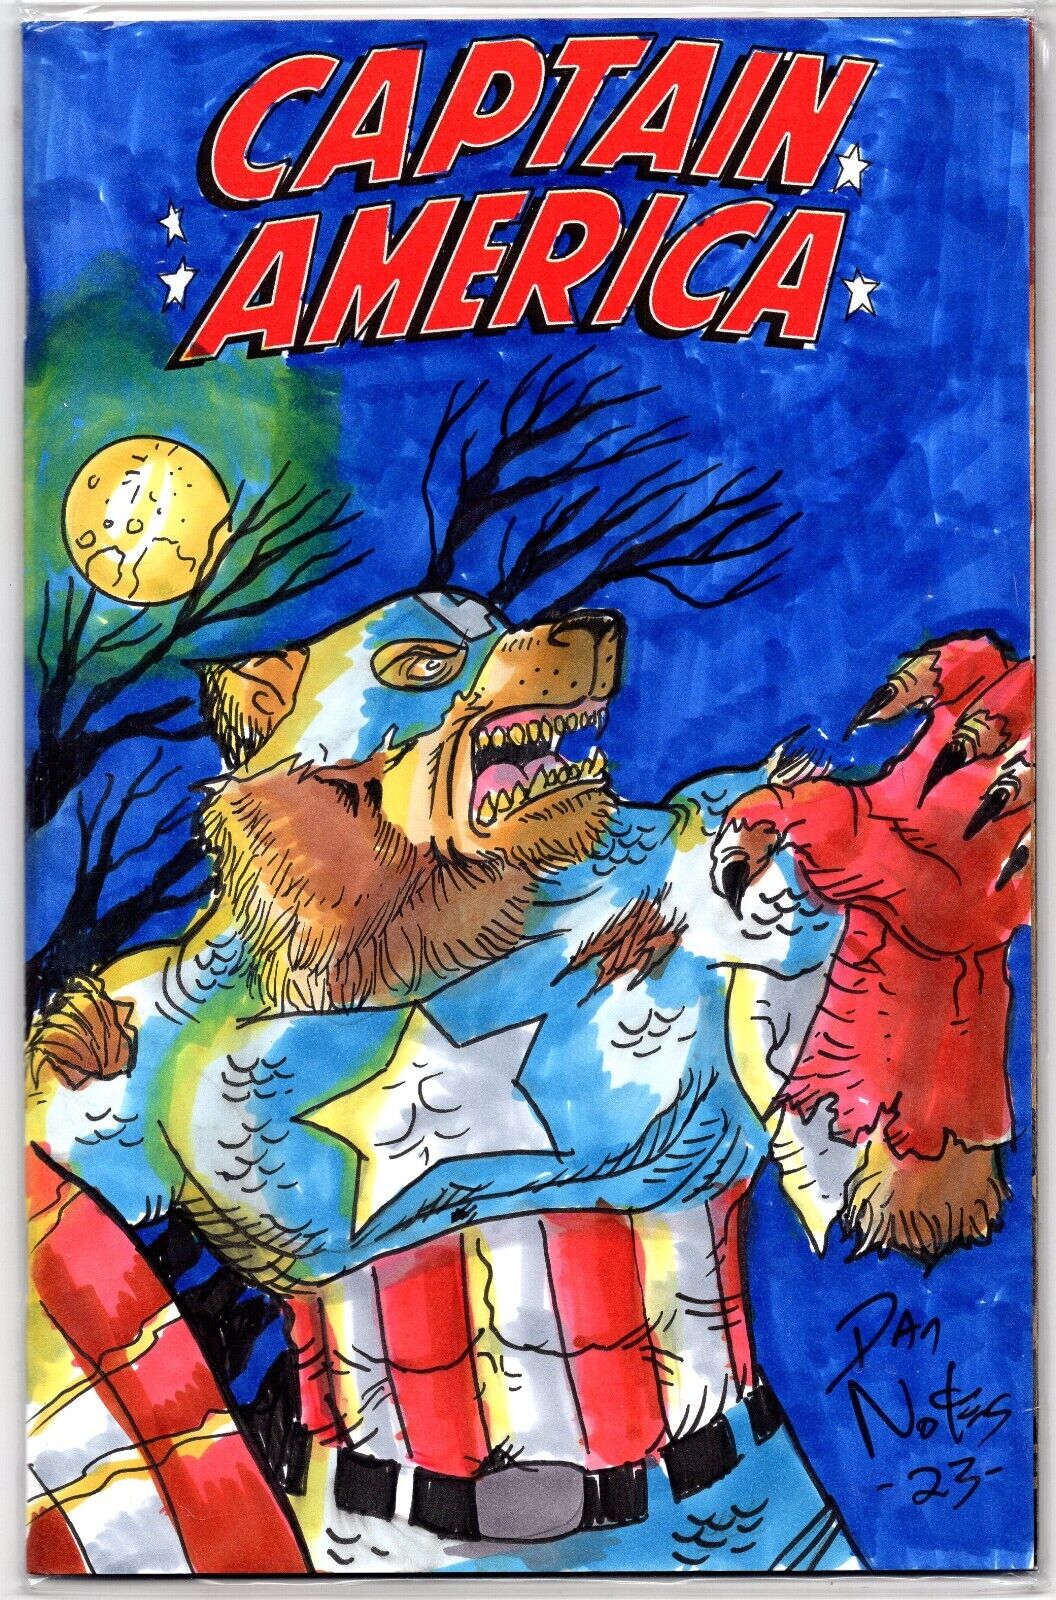 ONE-OF-A-KIND HAND-DRAWN, INKED AND COLORED SKETCHCOVER COMIC by Dan Nokes WERE